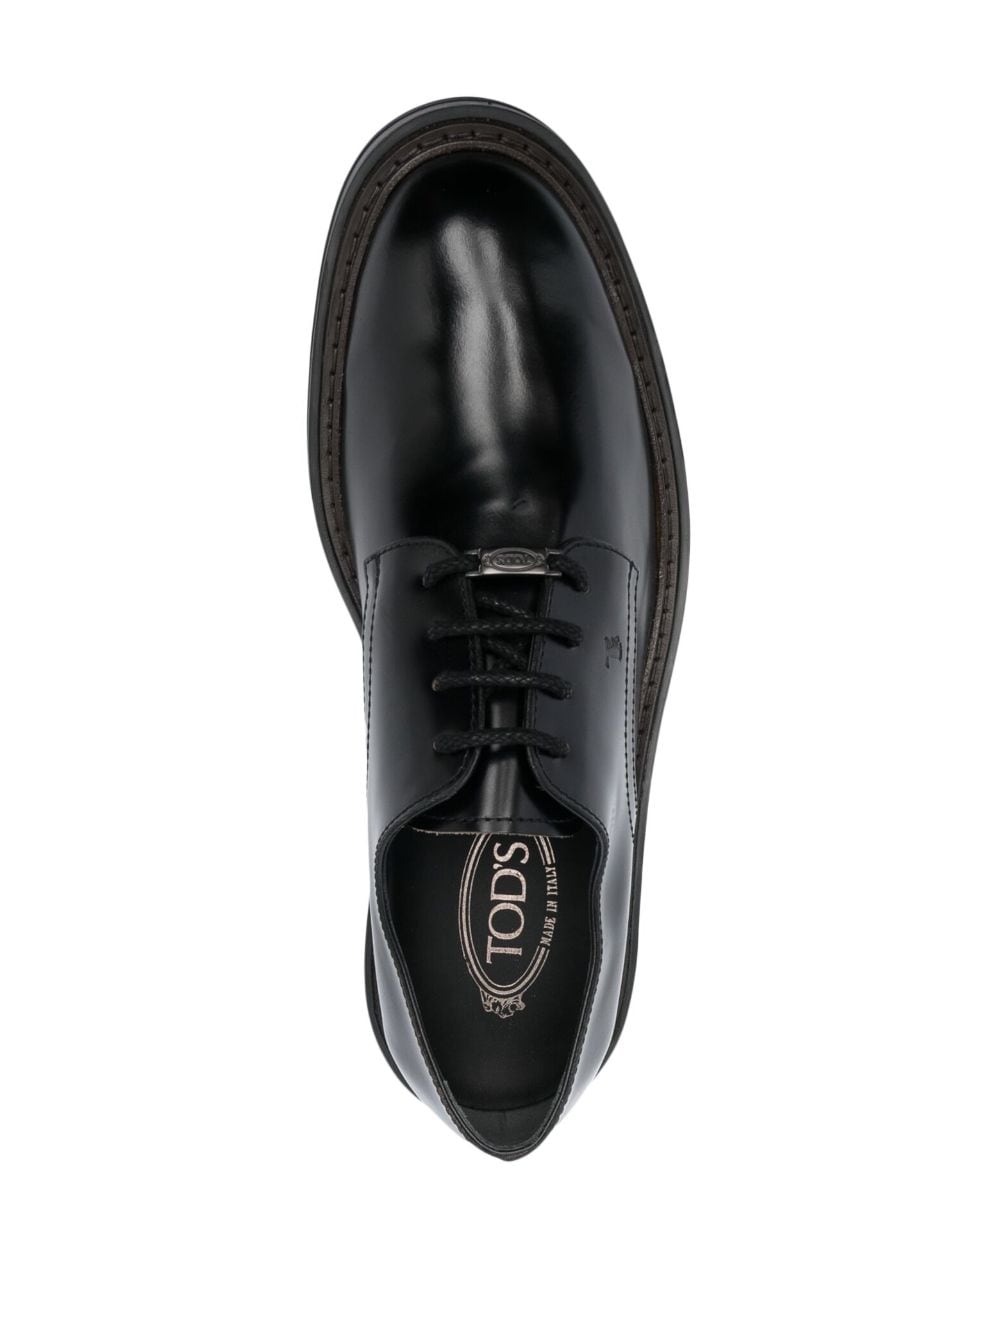 TOD'S Black Leather Moccasins for Men FW23